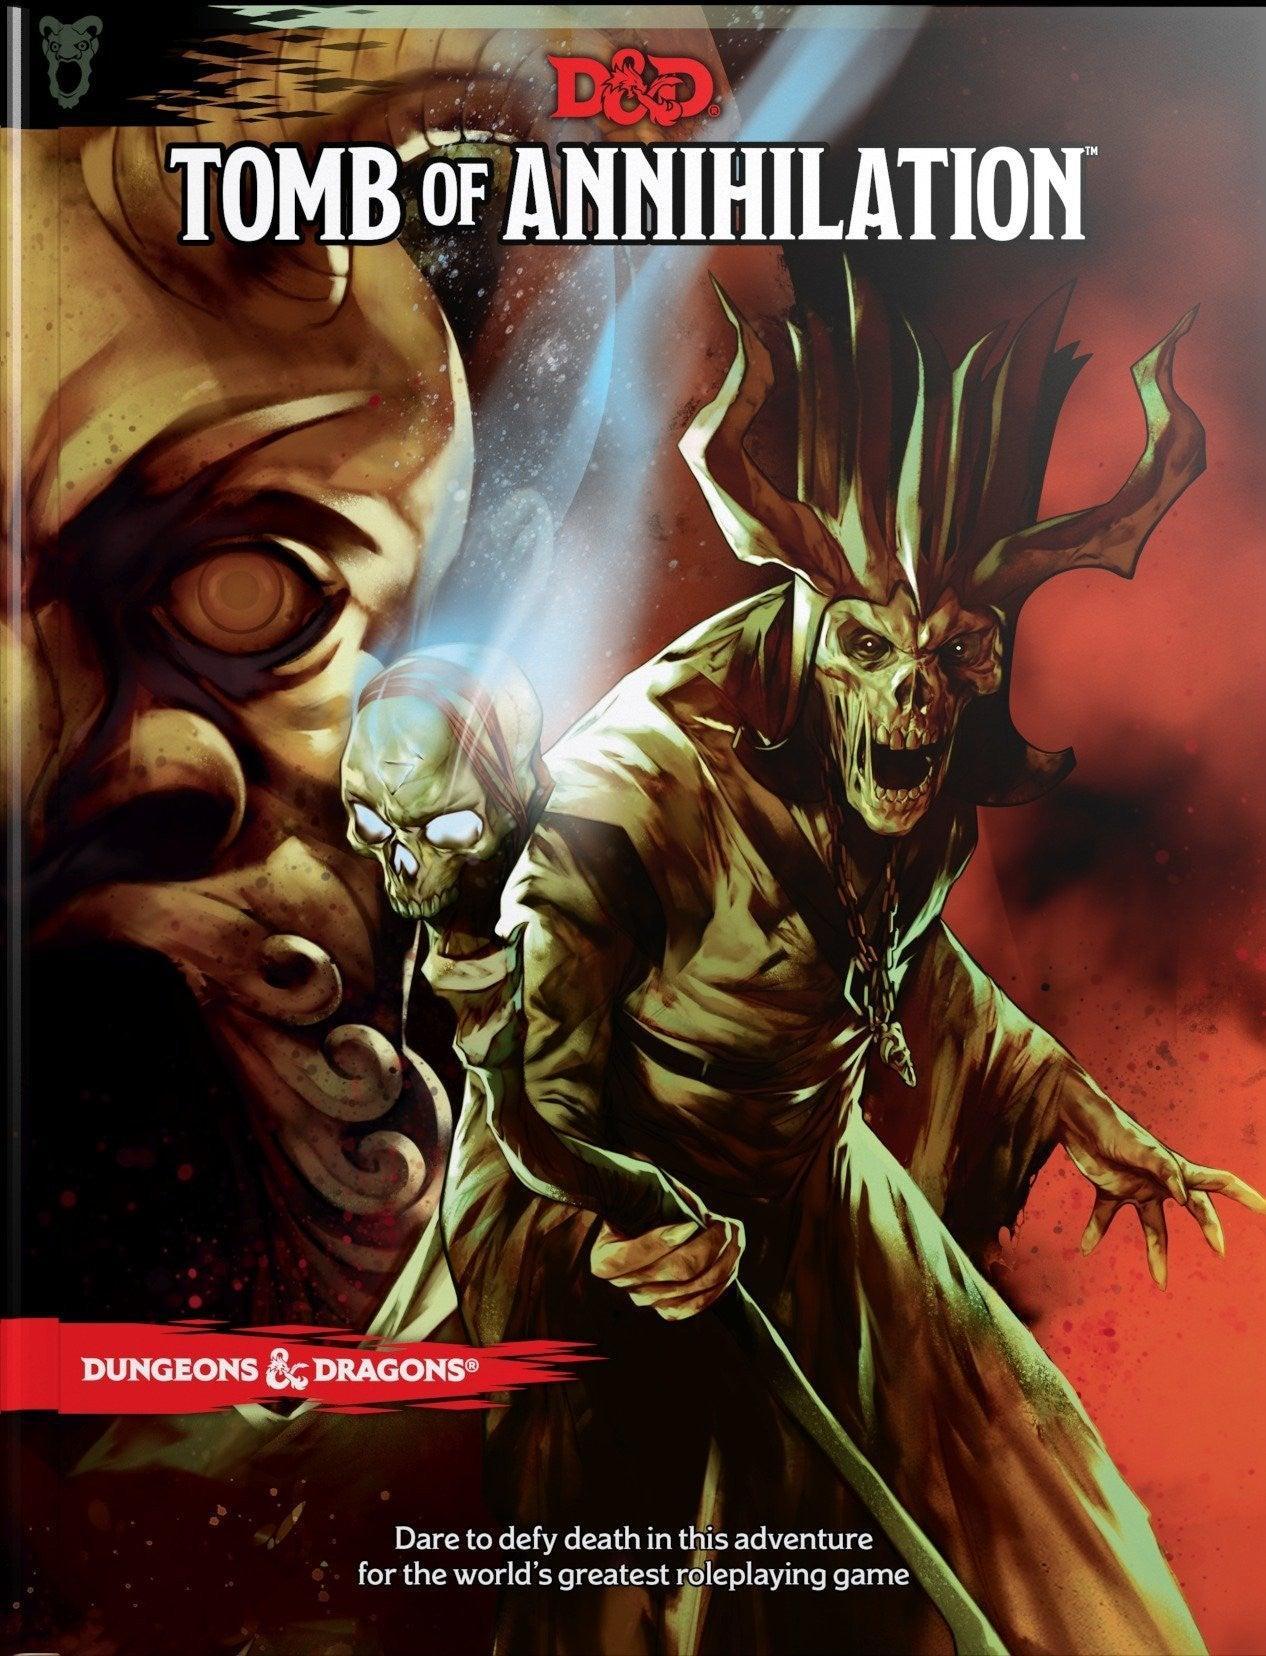 VR-87514 D&D Dungeons & Dragons Tomb of Annihilation Hardcover - Wizards of the Coast - Titan Pop Culture